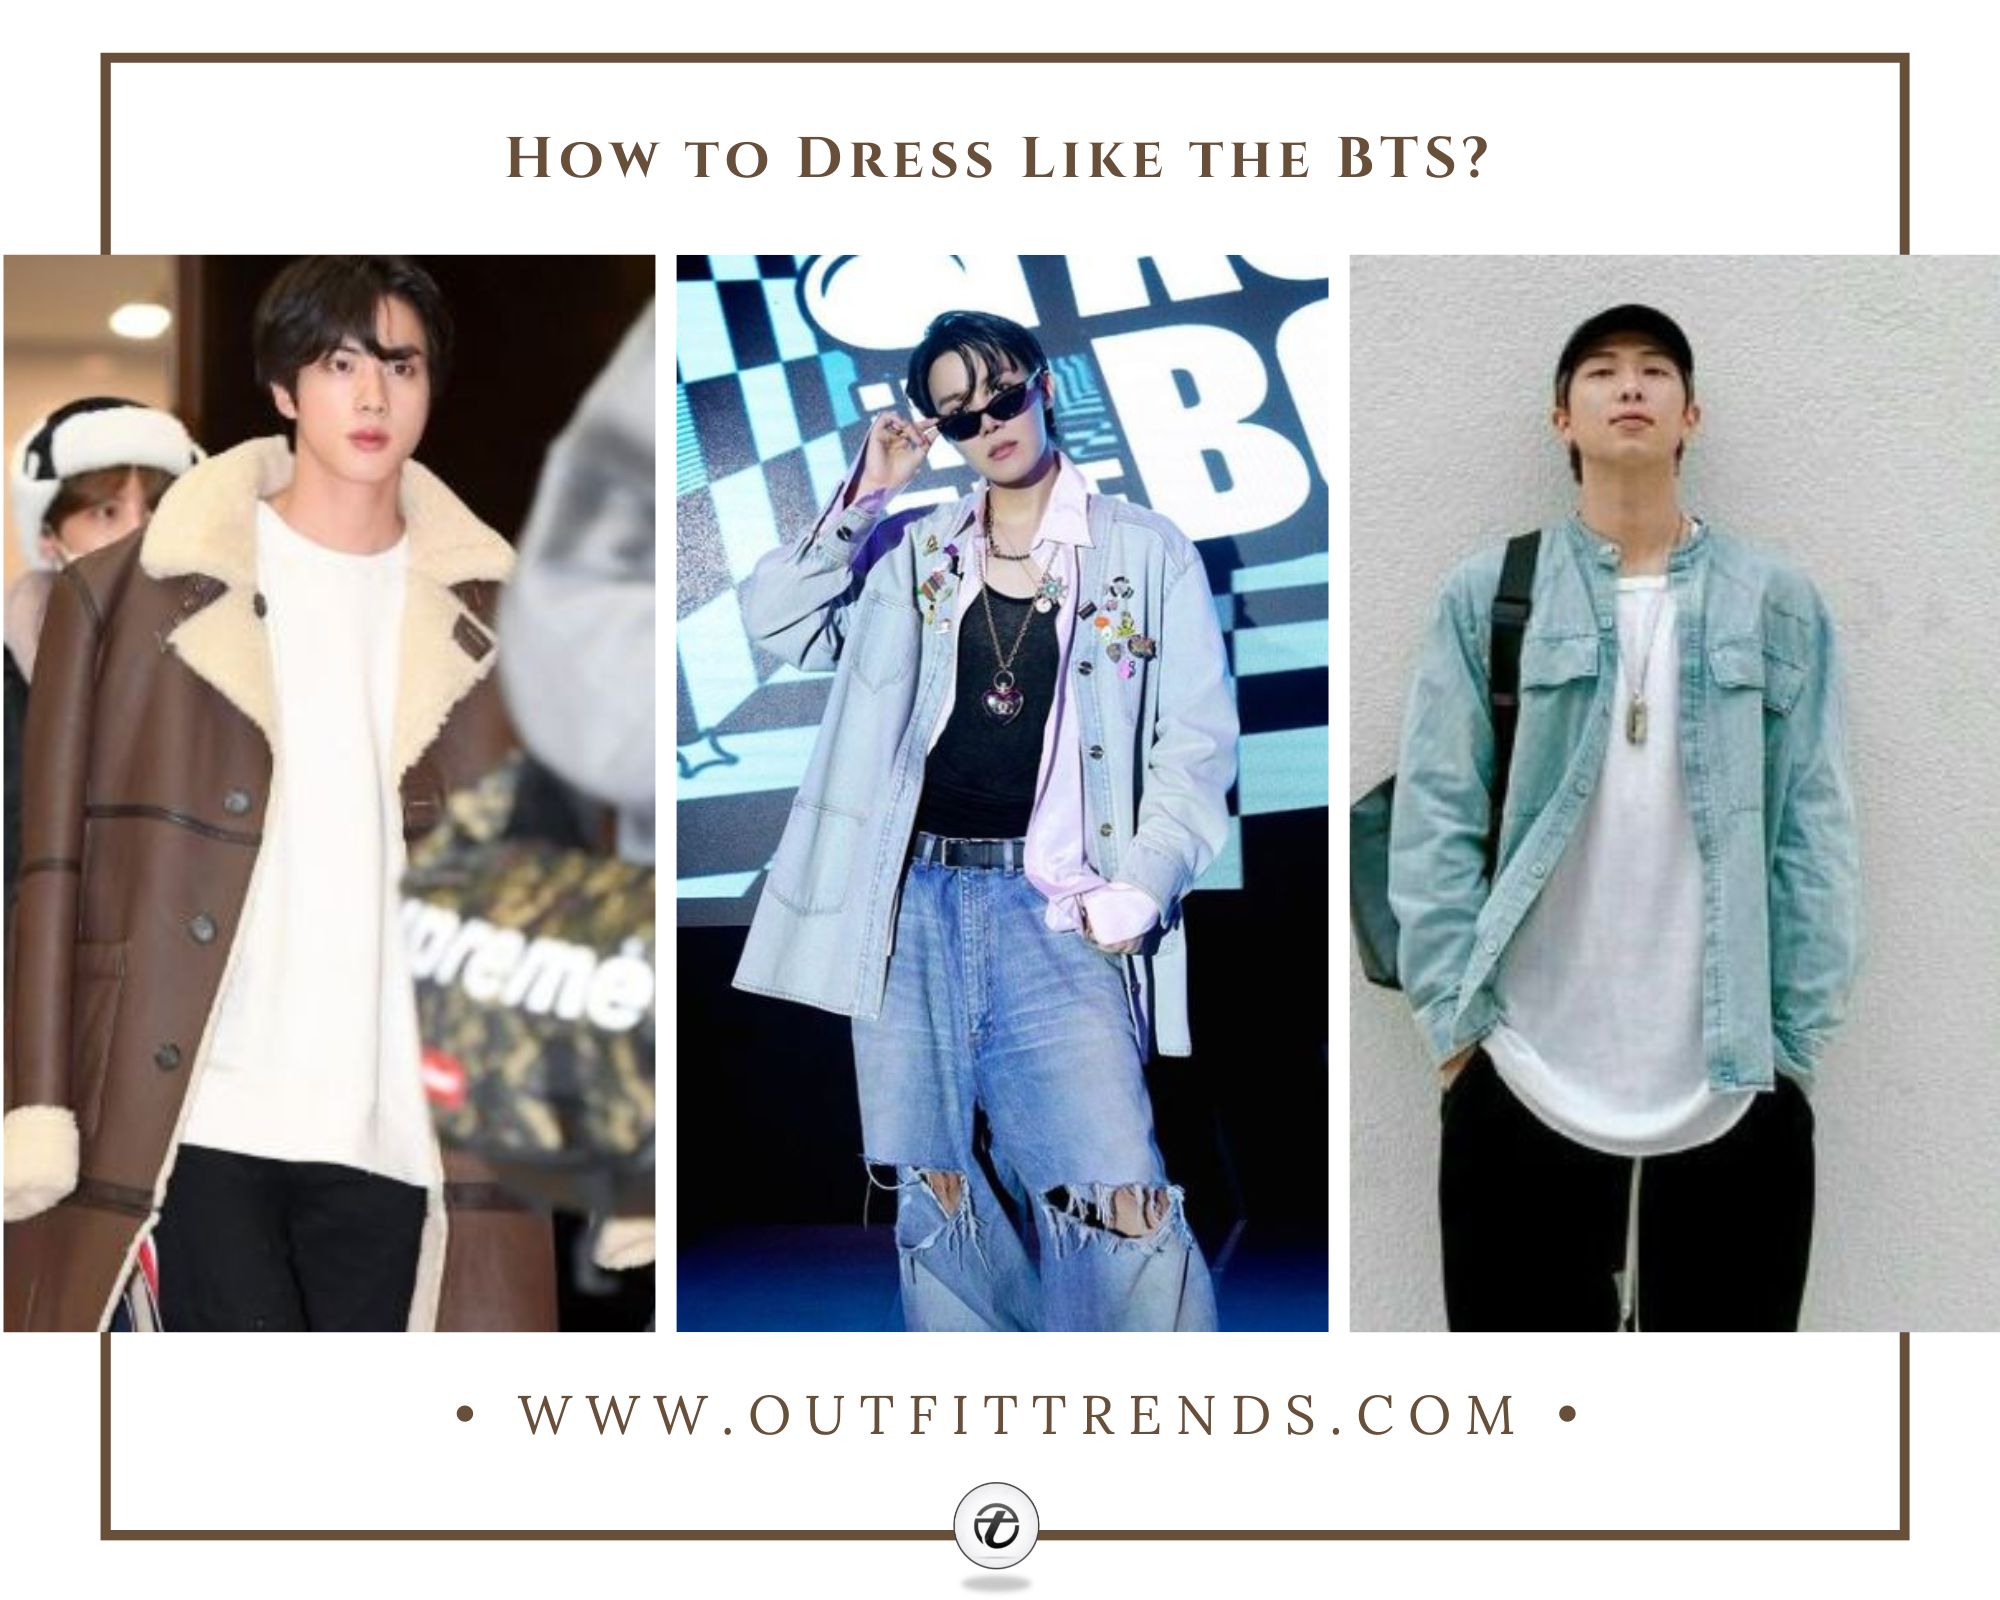 21 Best BTS Inspired Outfits for Men to Try This Year